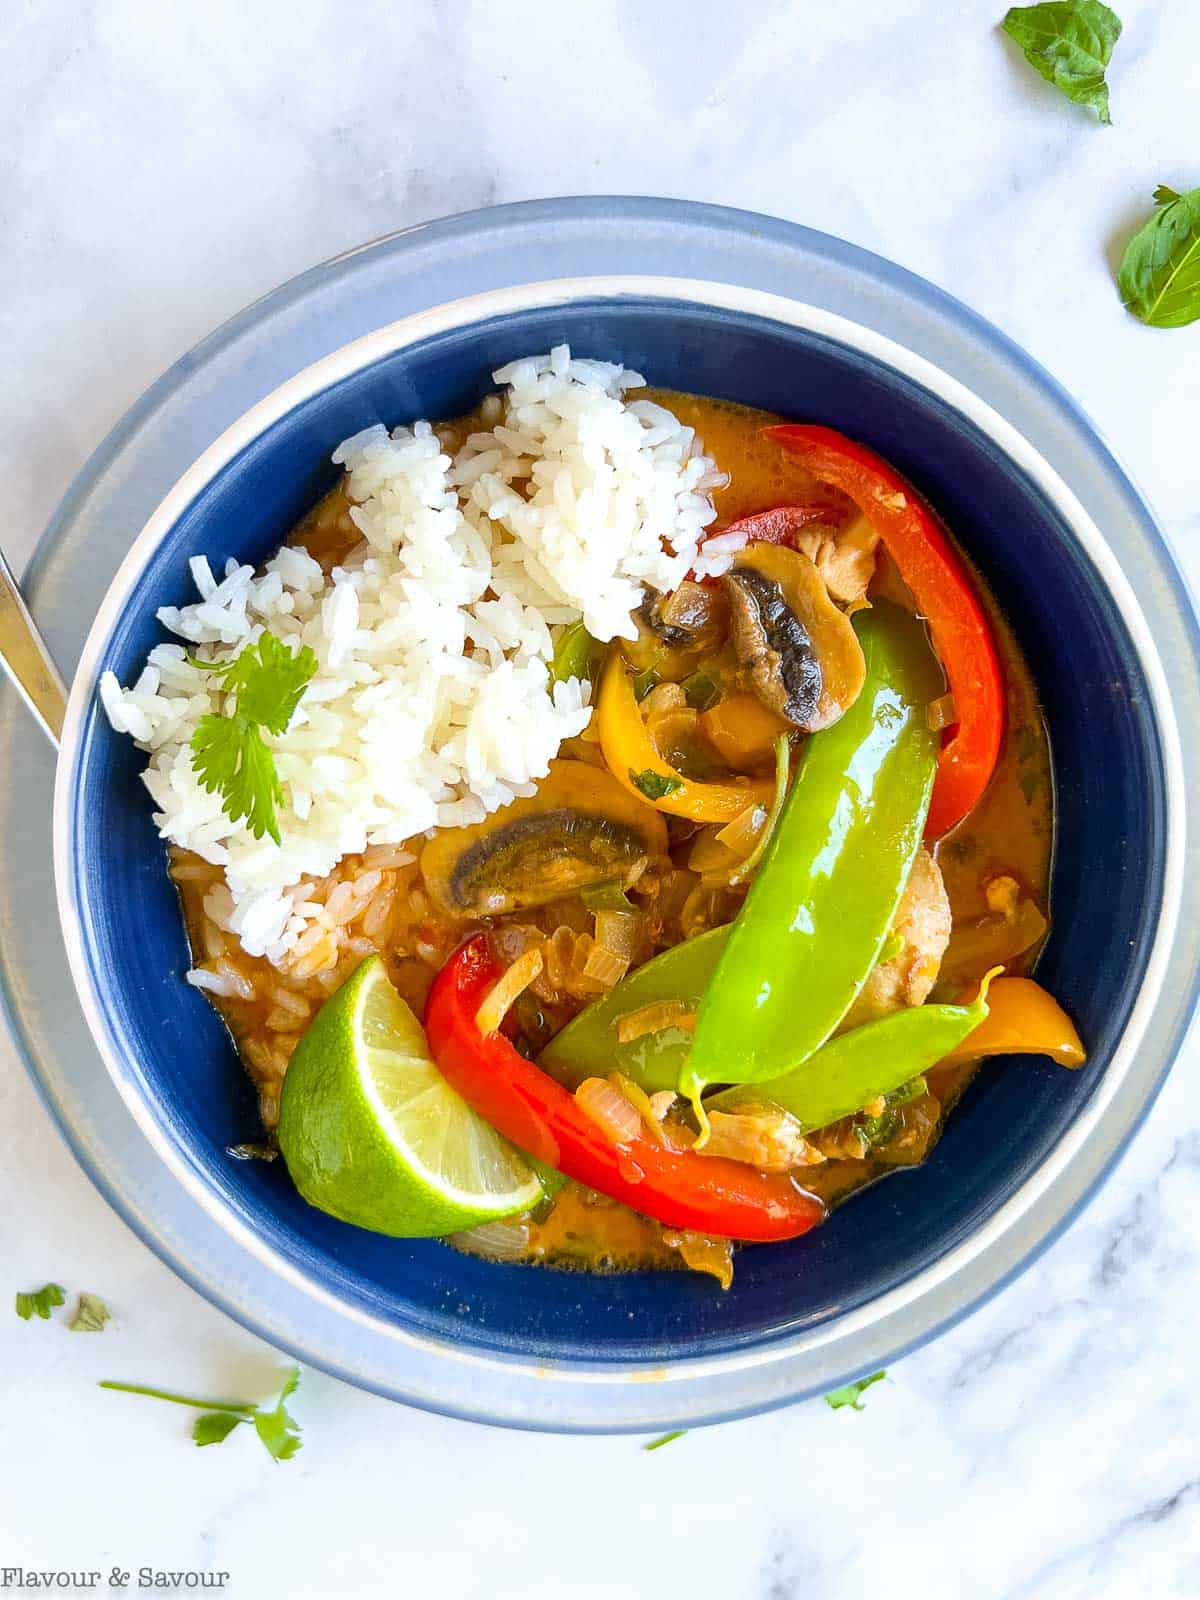 A bowl of Thai red curry with chicken and vegetables over rice.